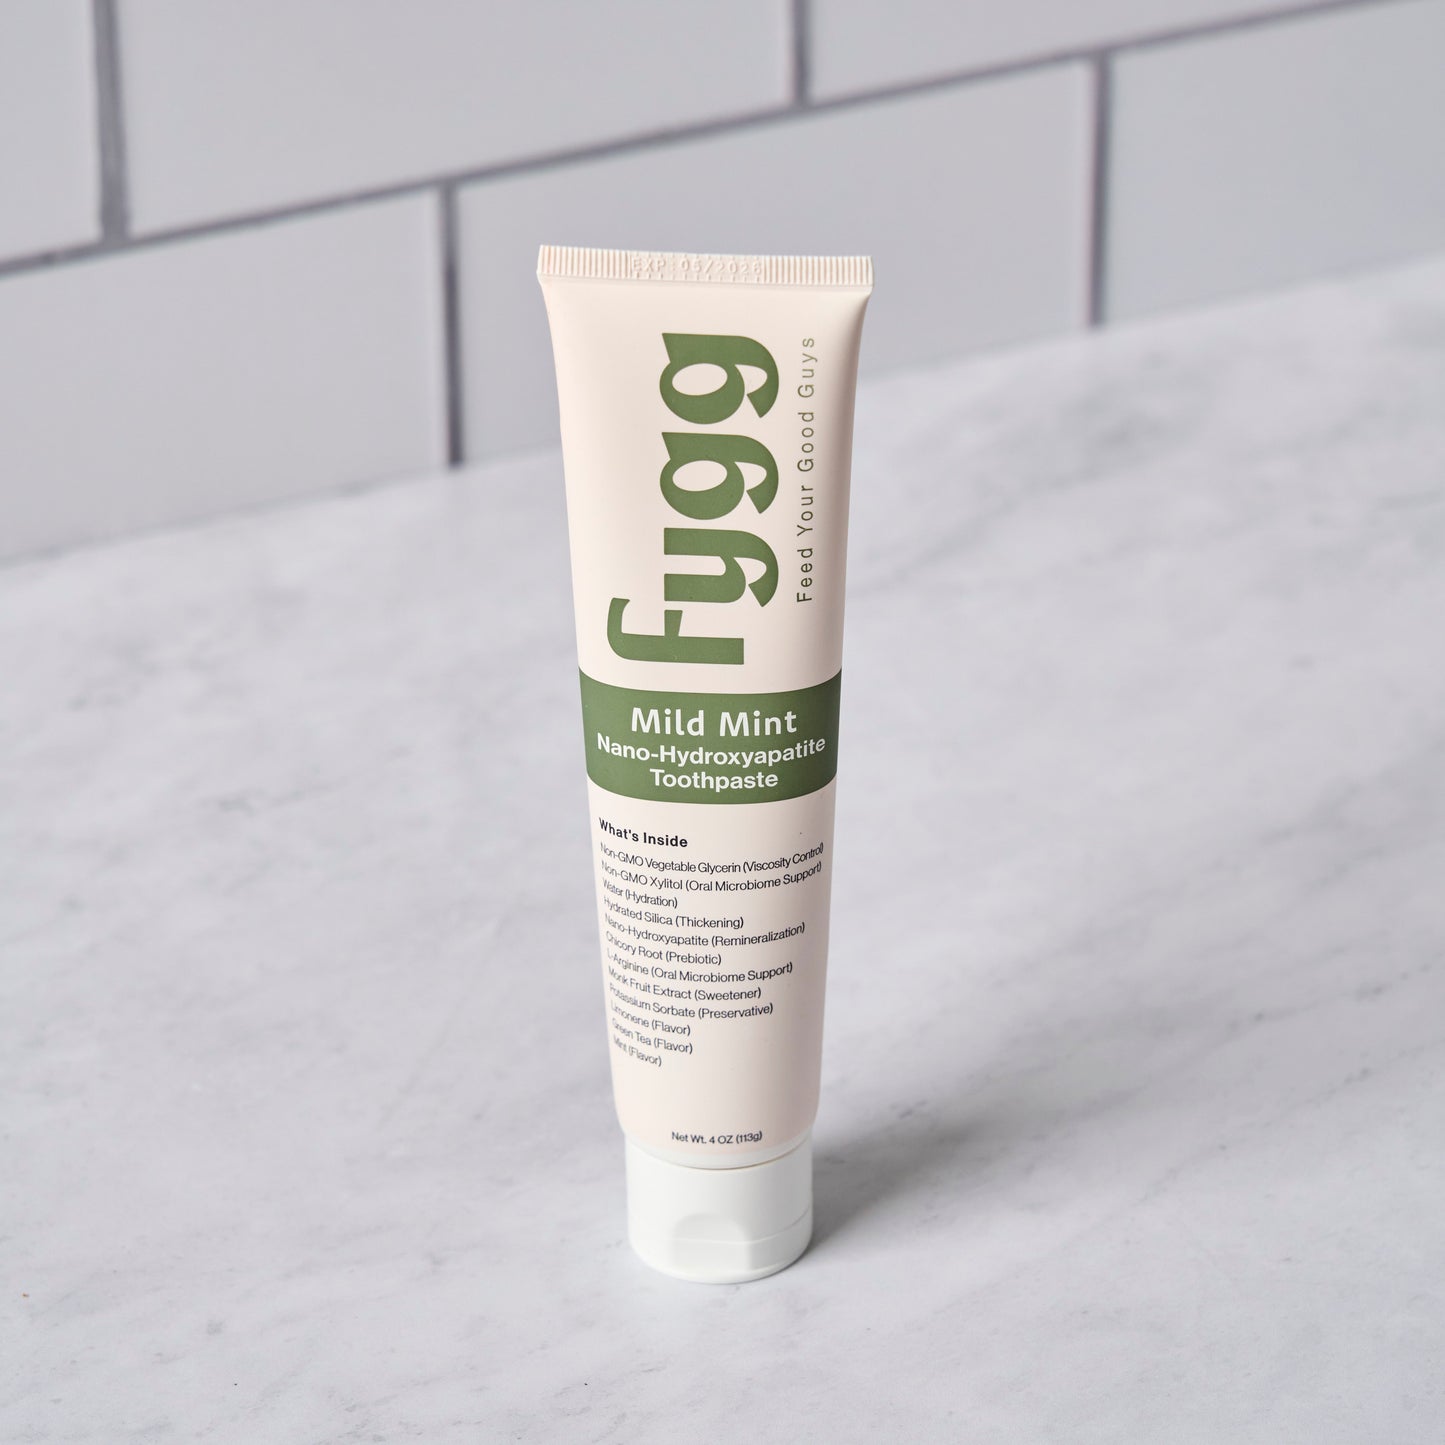 Fygg Nano-Hydroxyapatite fluoride free Toothpaste in Mild Mint with Subway Tile Background